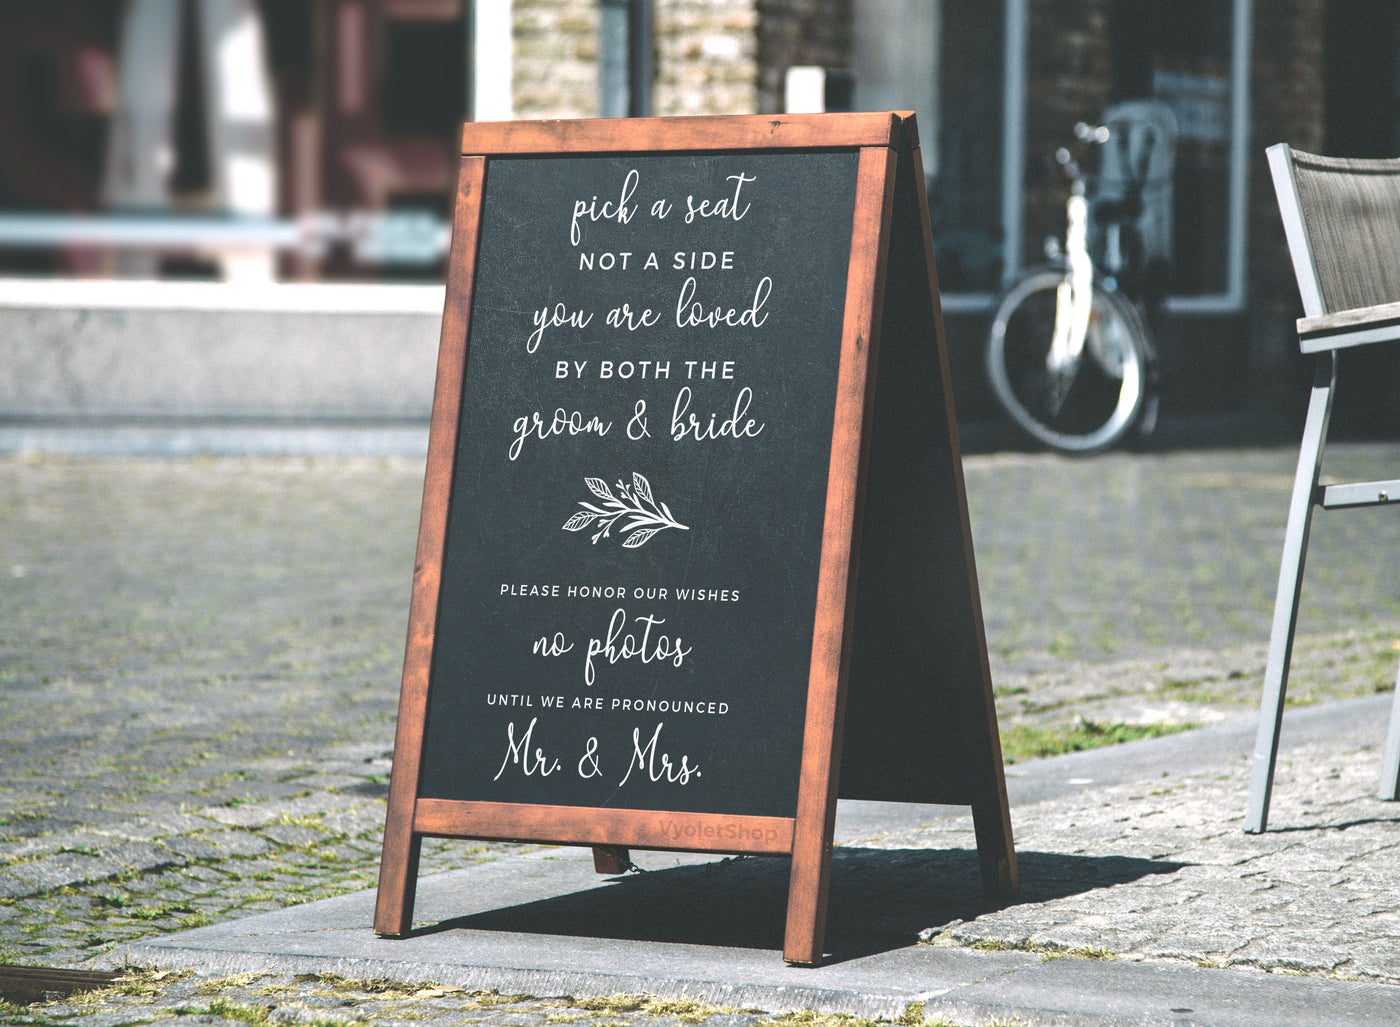 pick a seat not a side you are loved by both the groom & bride please honor our wishes no photos until we are pronounced Mr. & mrs. wedding sign chalkboard sign wedding decal  chalkboard wedding decal sign diy sign decal diy wedding budget wedding rustic wedding decor vinyl decor sticker